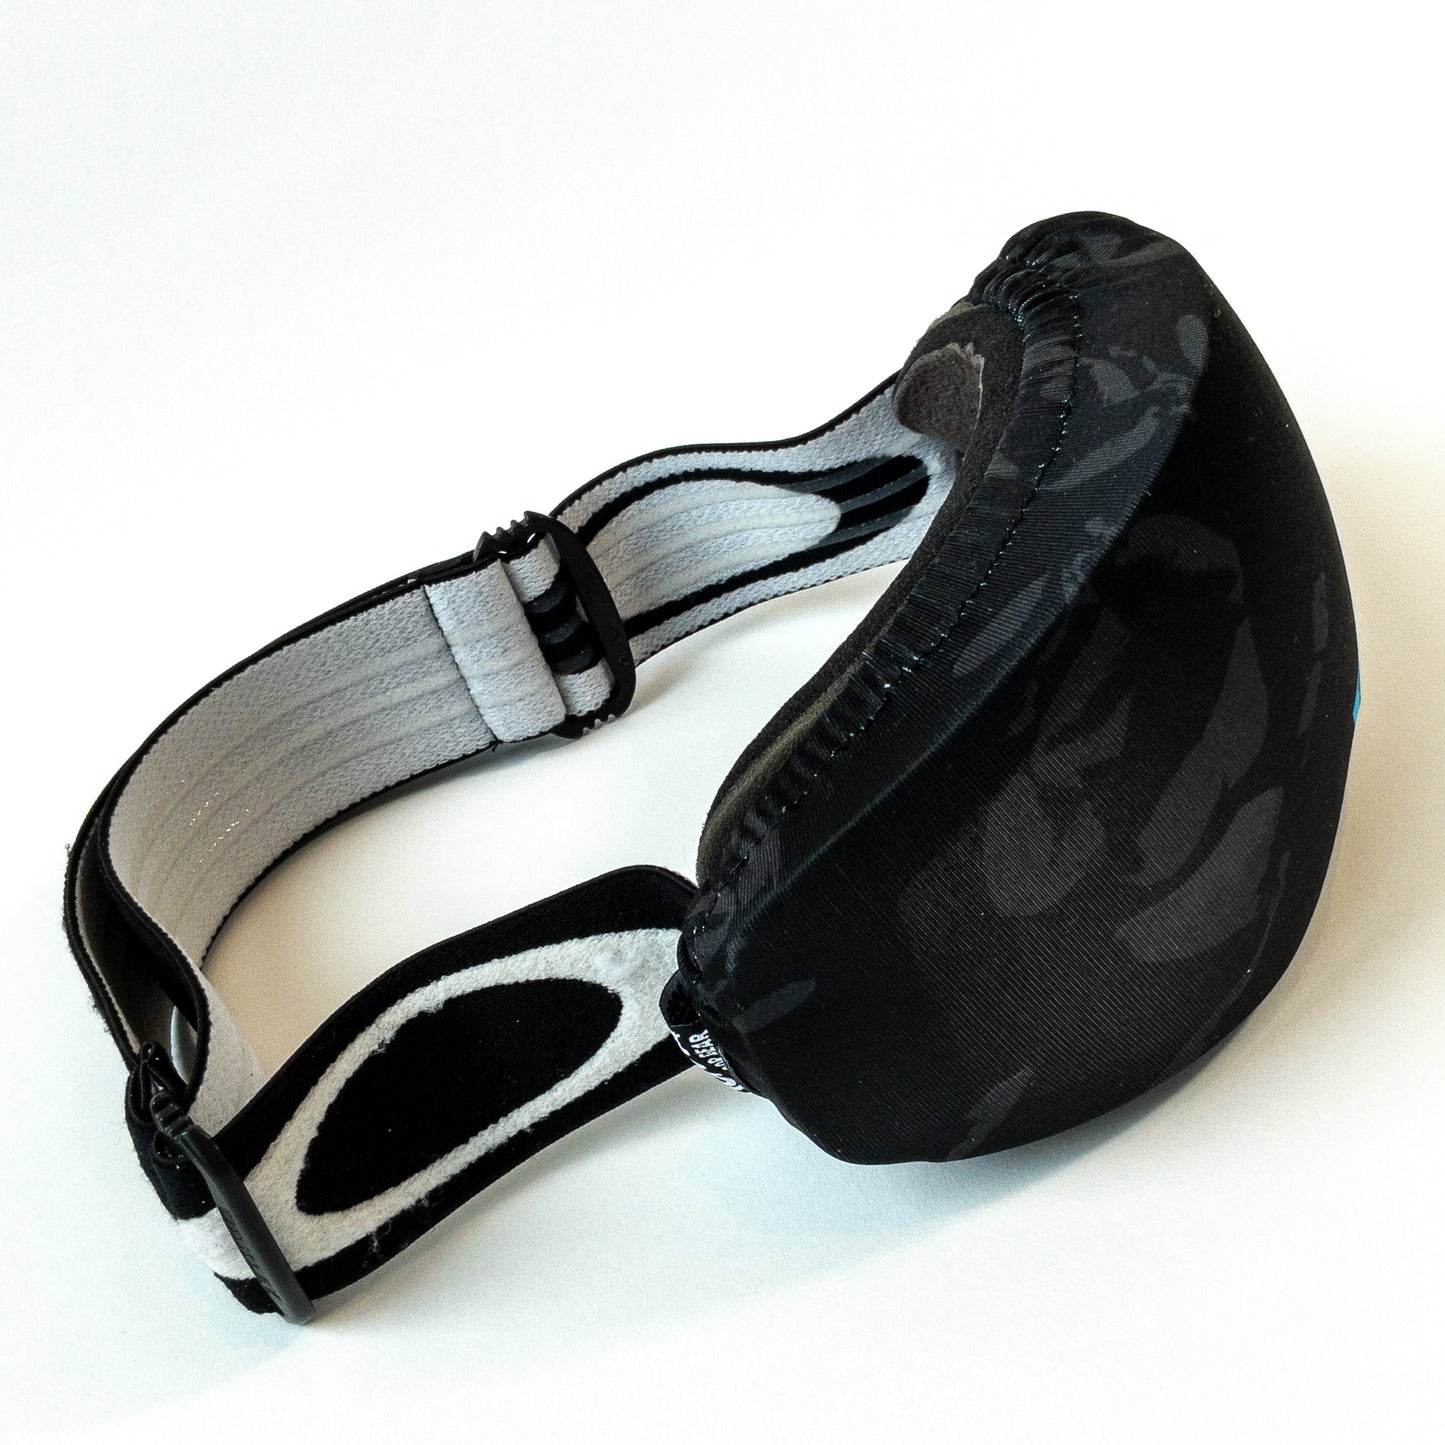 Goggle Cover in GreyRoses